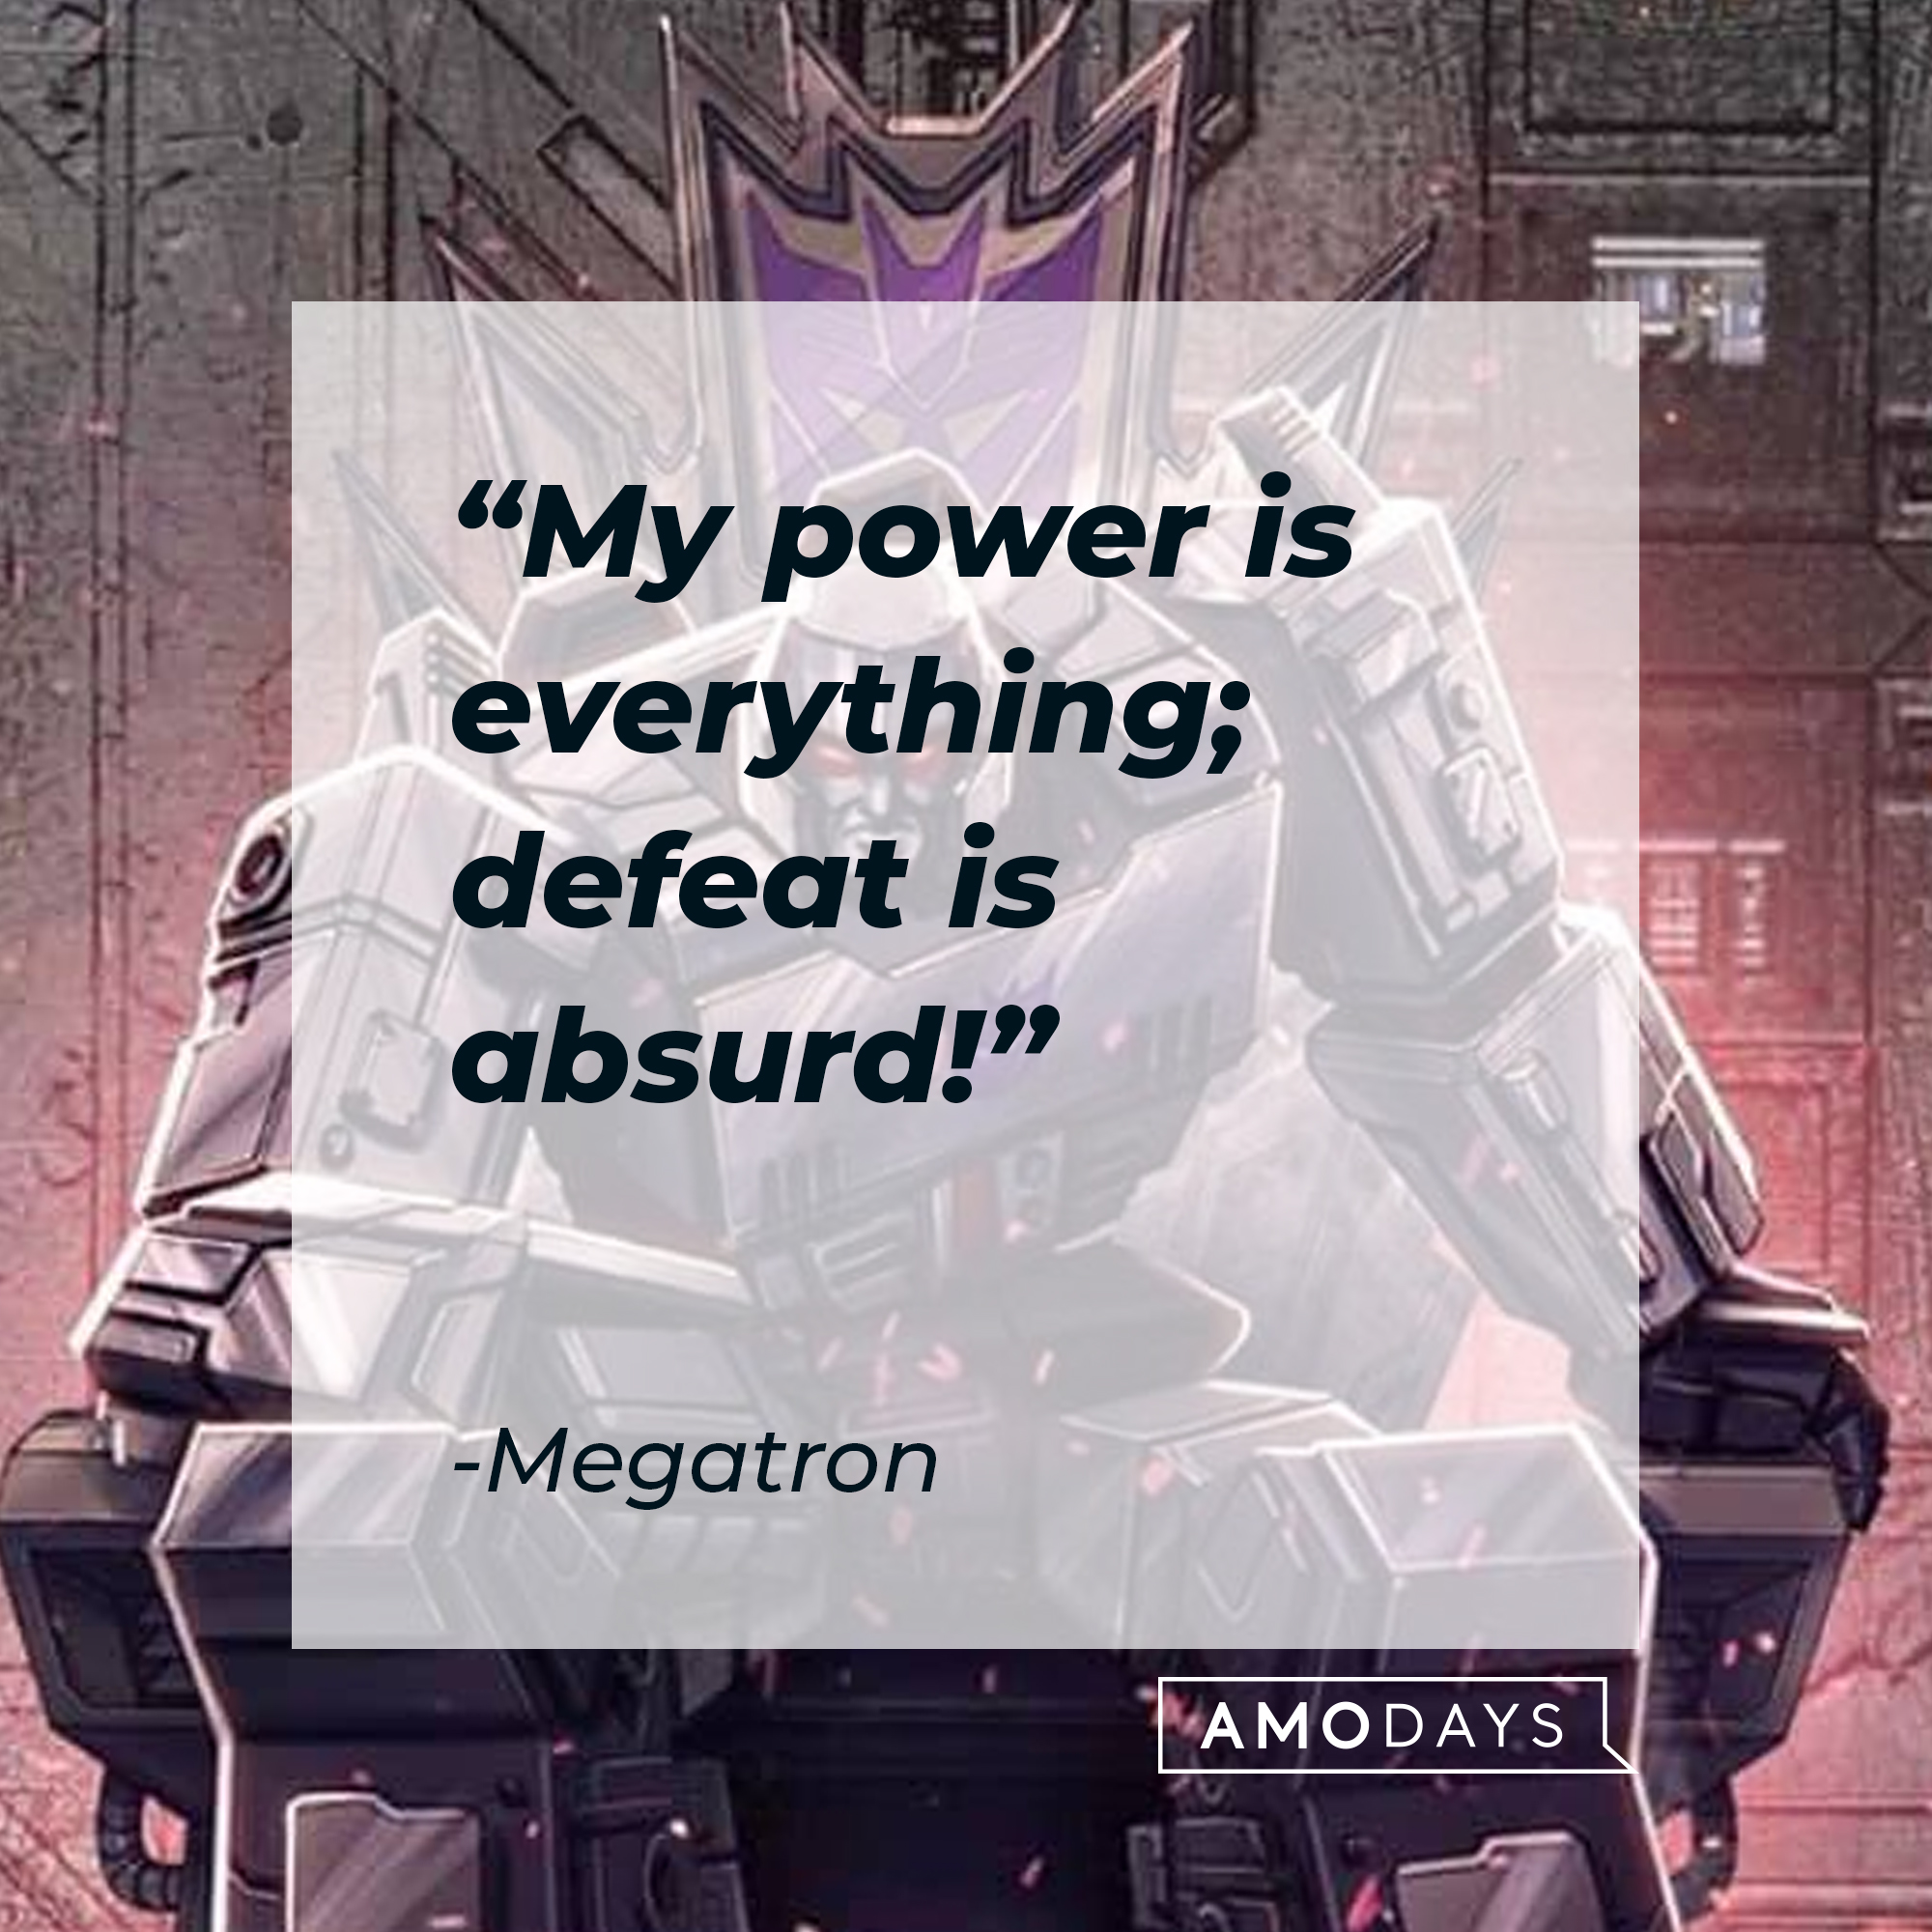 A photo of Megatron with his quote, "My power is everything; defeat is absurd!" | Source: Facebook/transformers